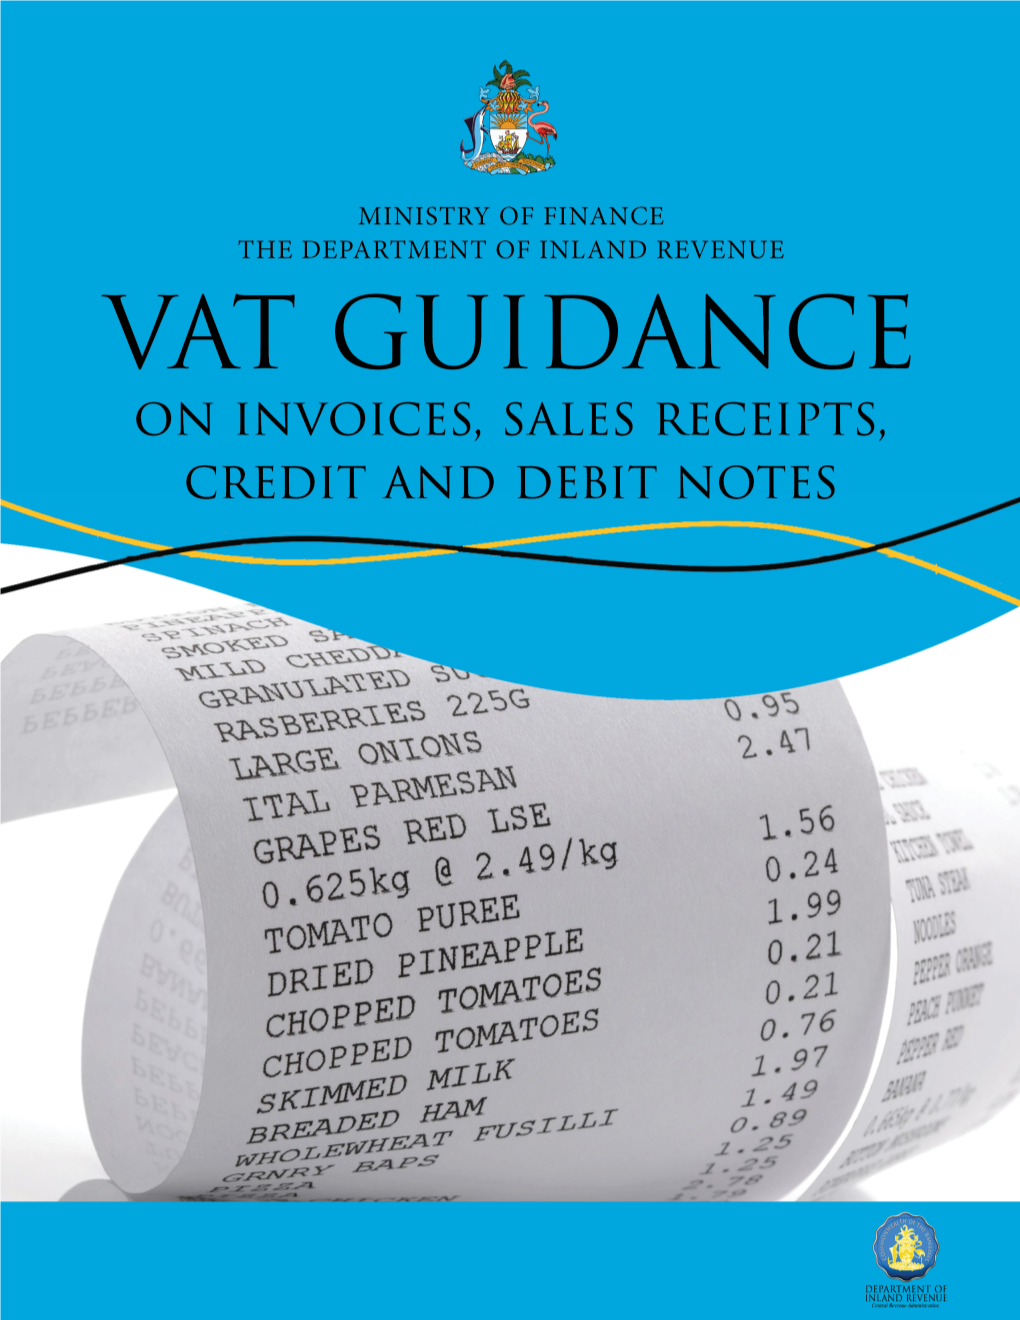 VAT Guidance on Invoices, Sales Receipts, Credit Notes and Debit